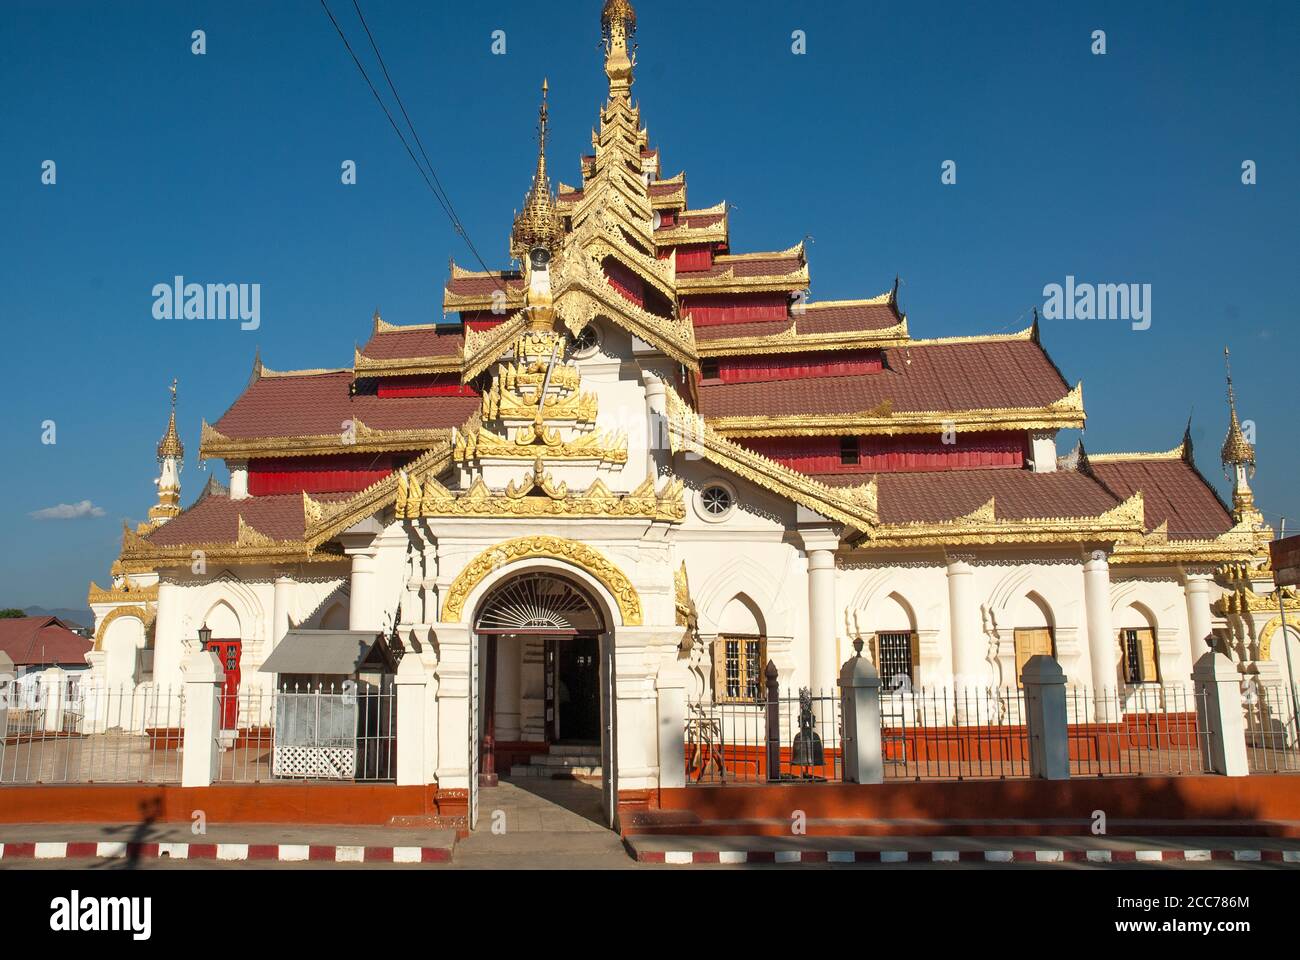 Buddhist temple, Kengtung, Shan State, Myanmar Stock Photo